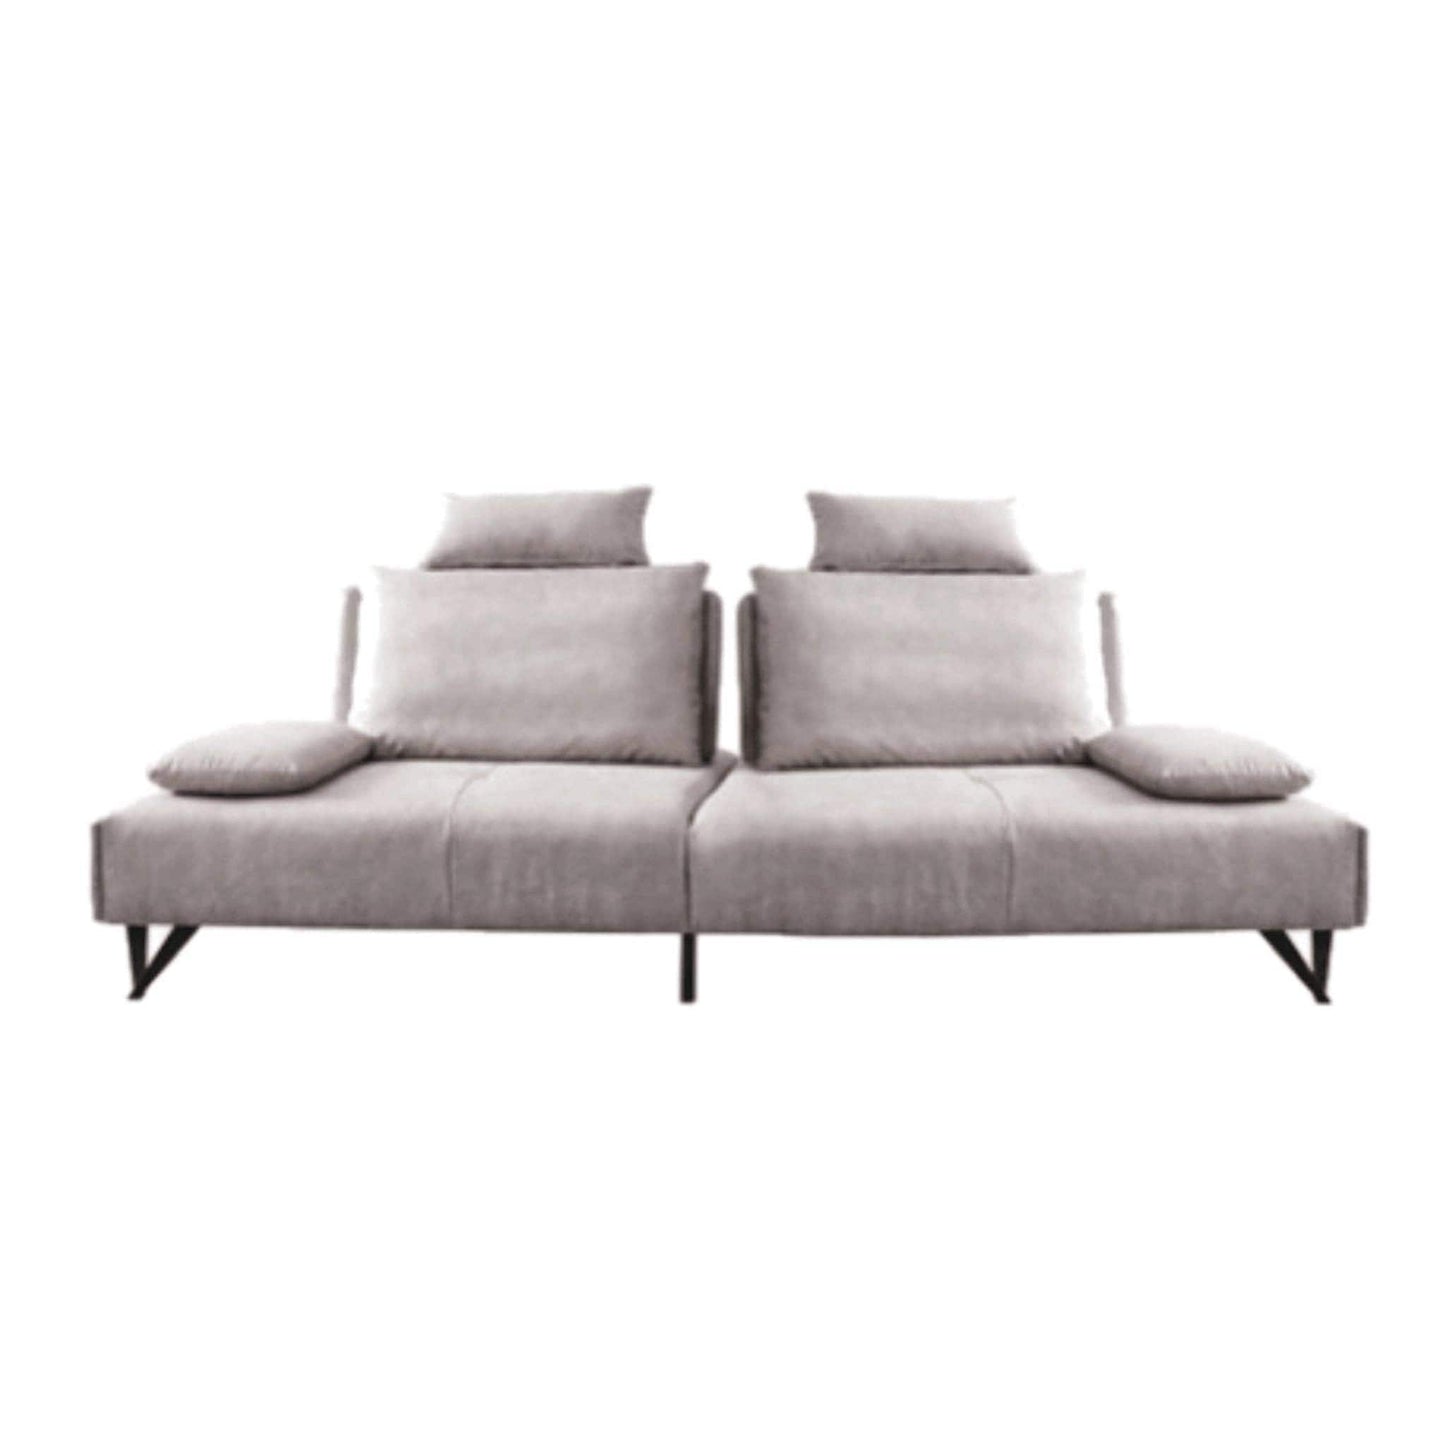 home-atelier-f31a Leather-Aire / 3 seater/ Length 232cm / Dark Grey Tallini Slider Sofa